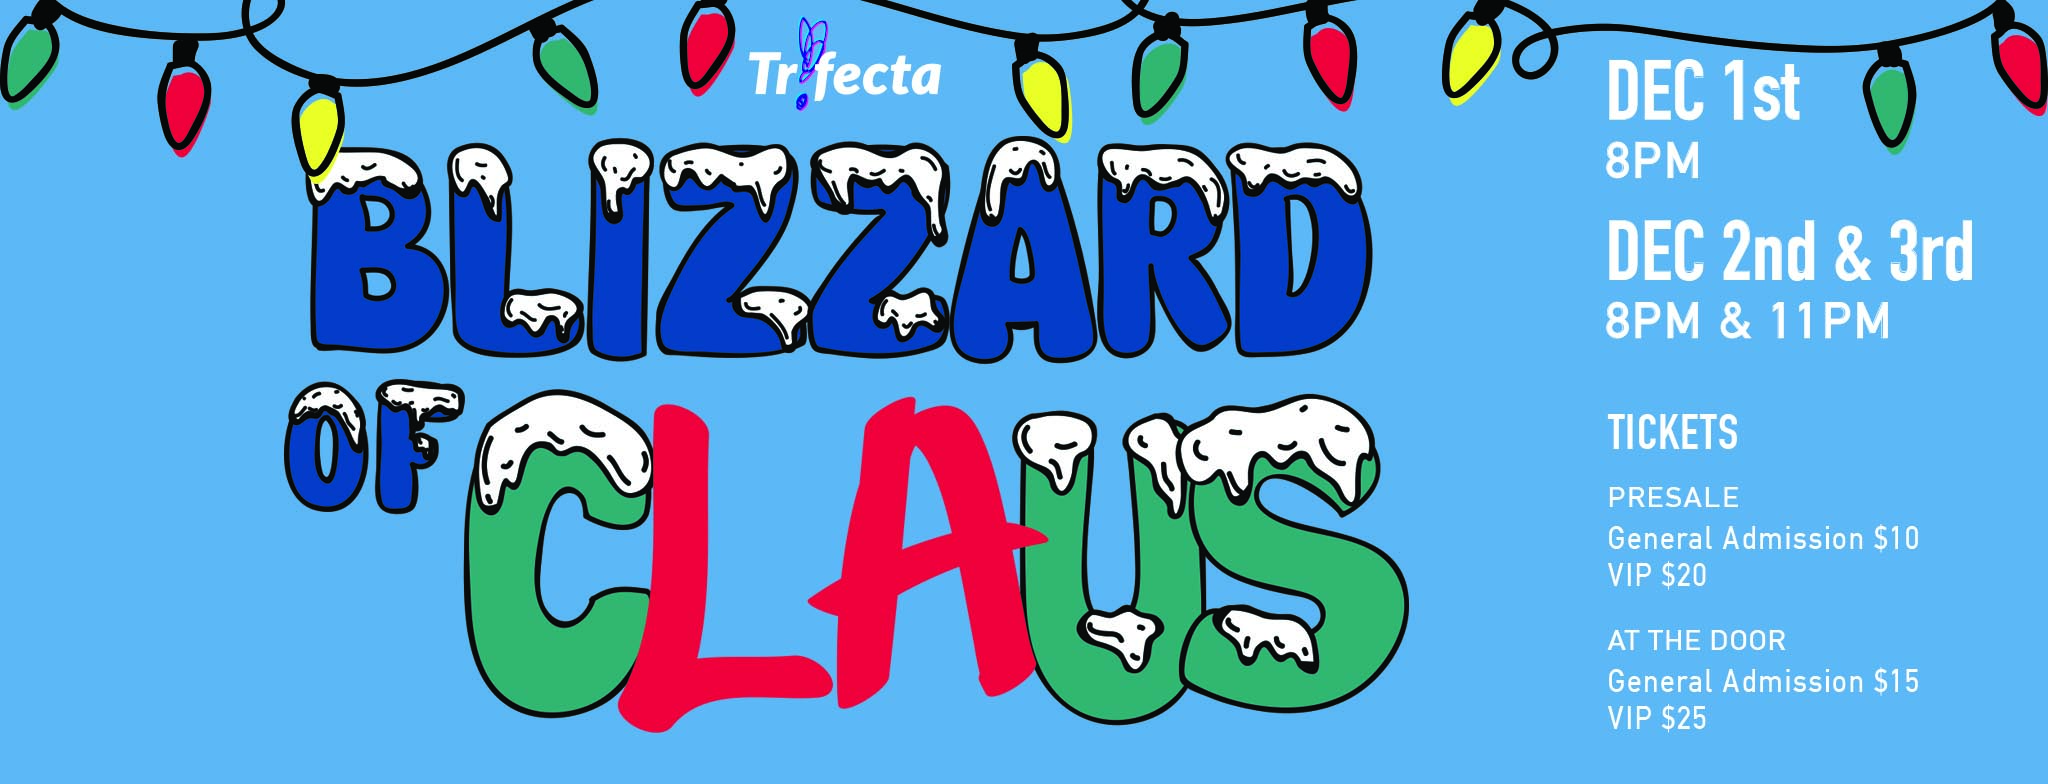 Bl!zzard of Claus